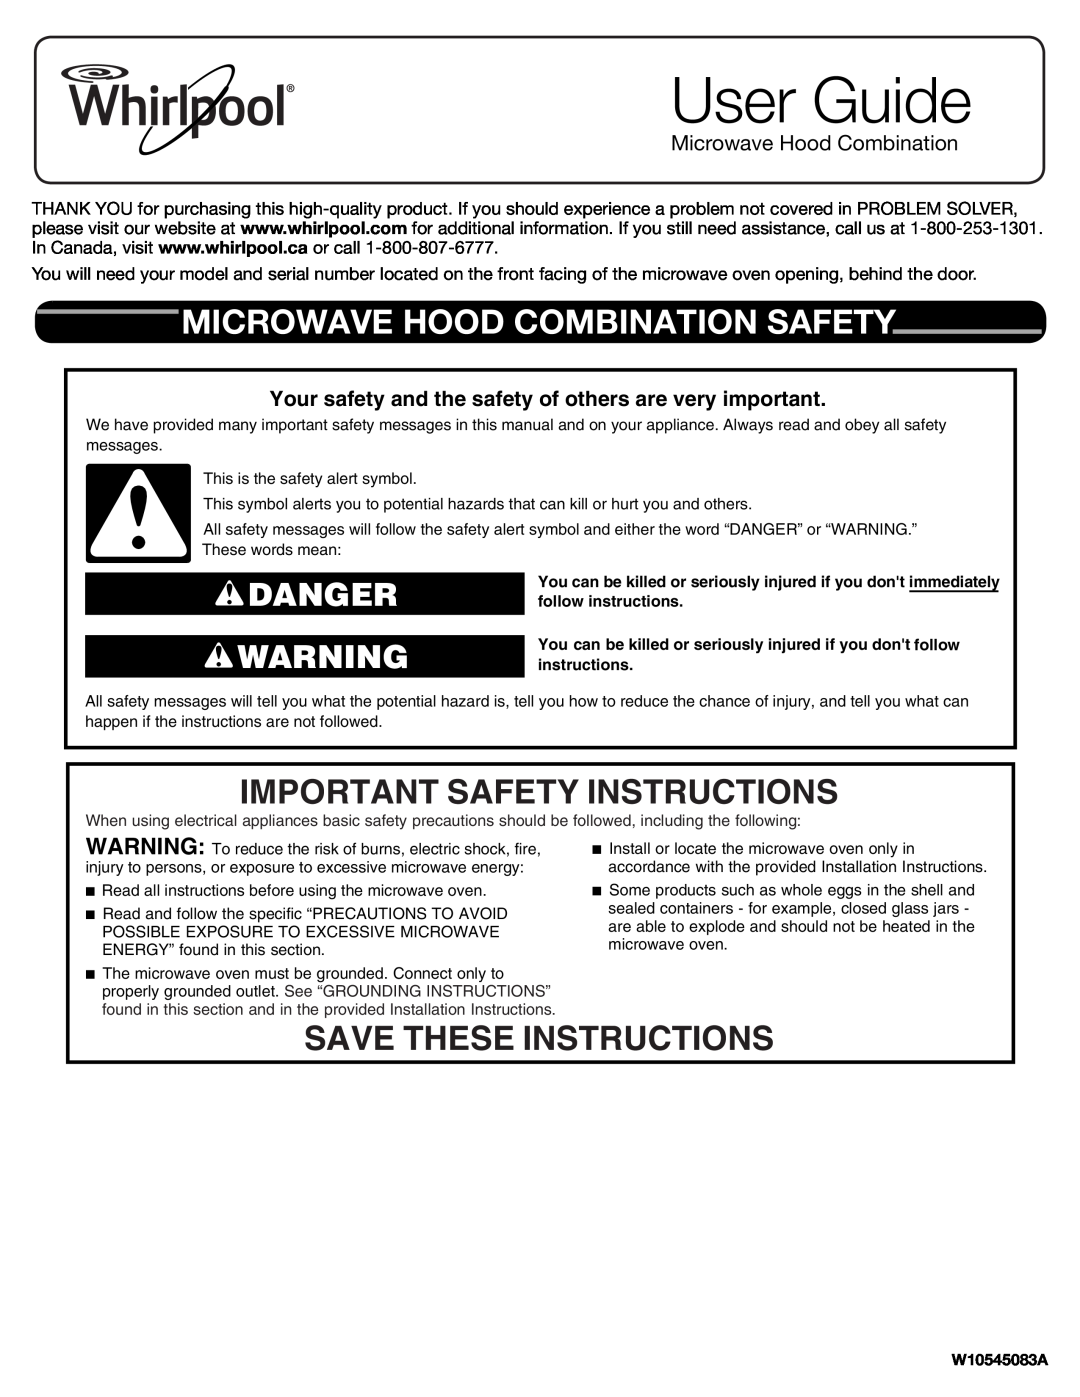 Whirlpool W10545083A important safety instructions User Guide, Microwave Hood Combination Safety, Save These Instructions 